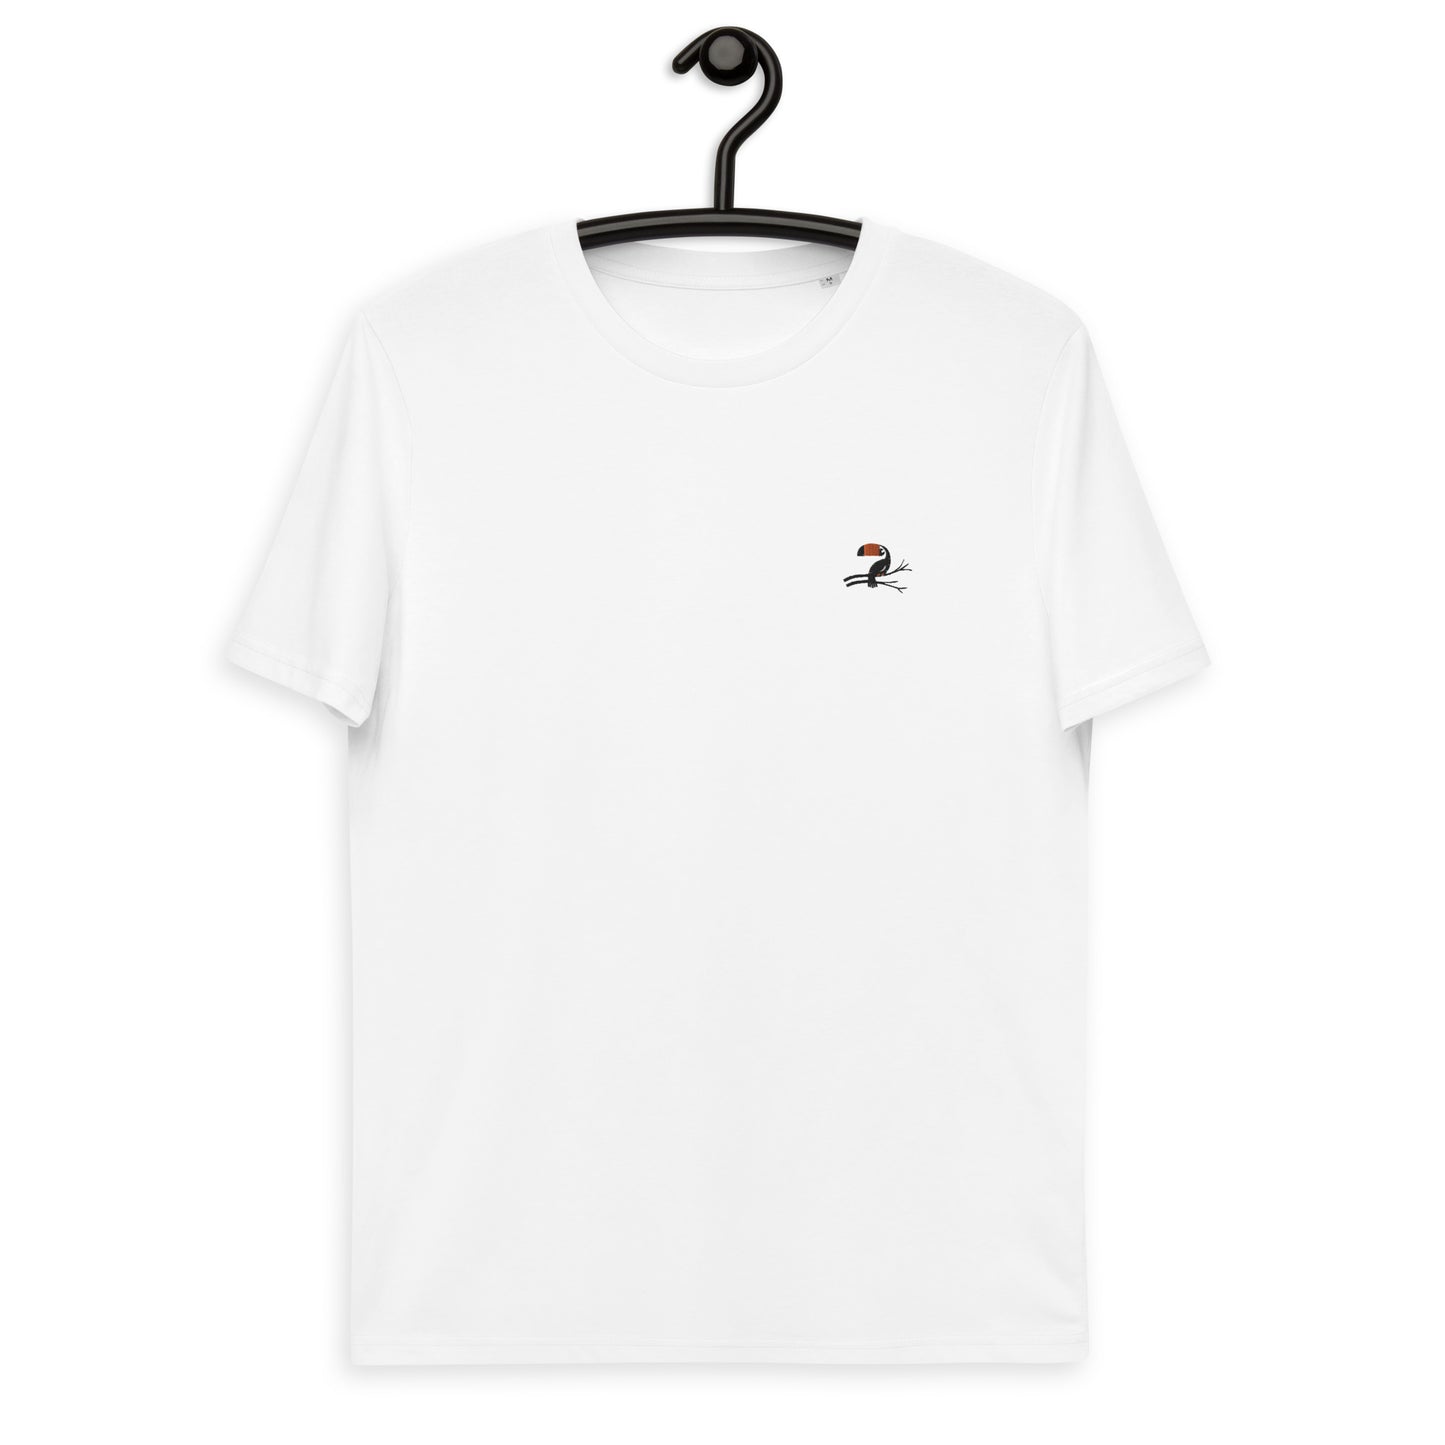 The Accented Toucan [Limited Edition]